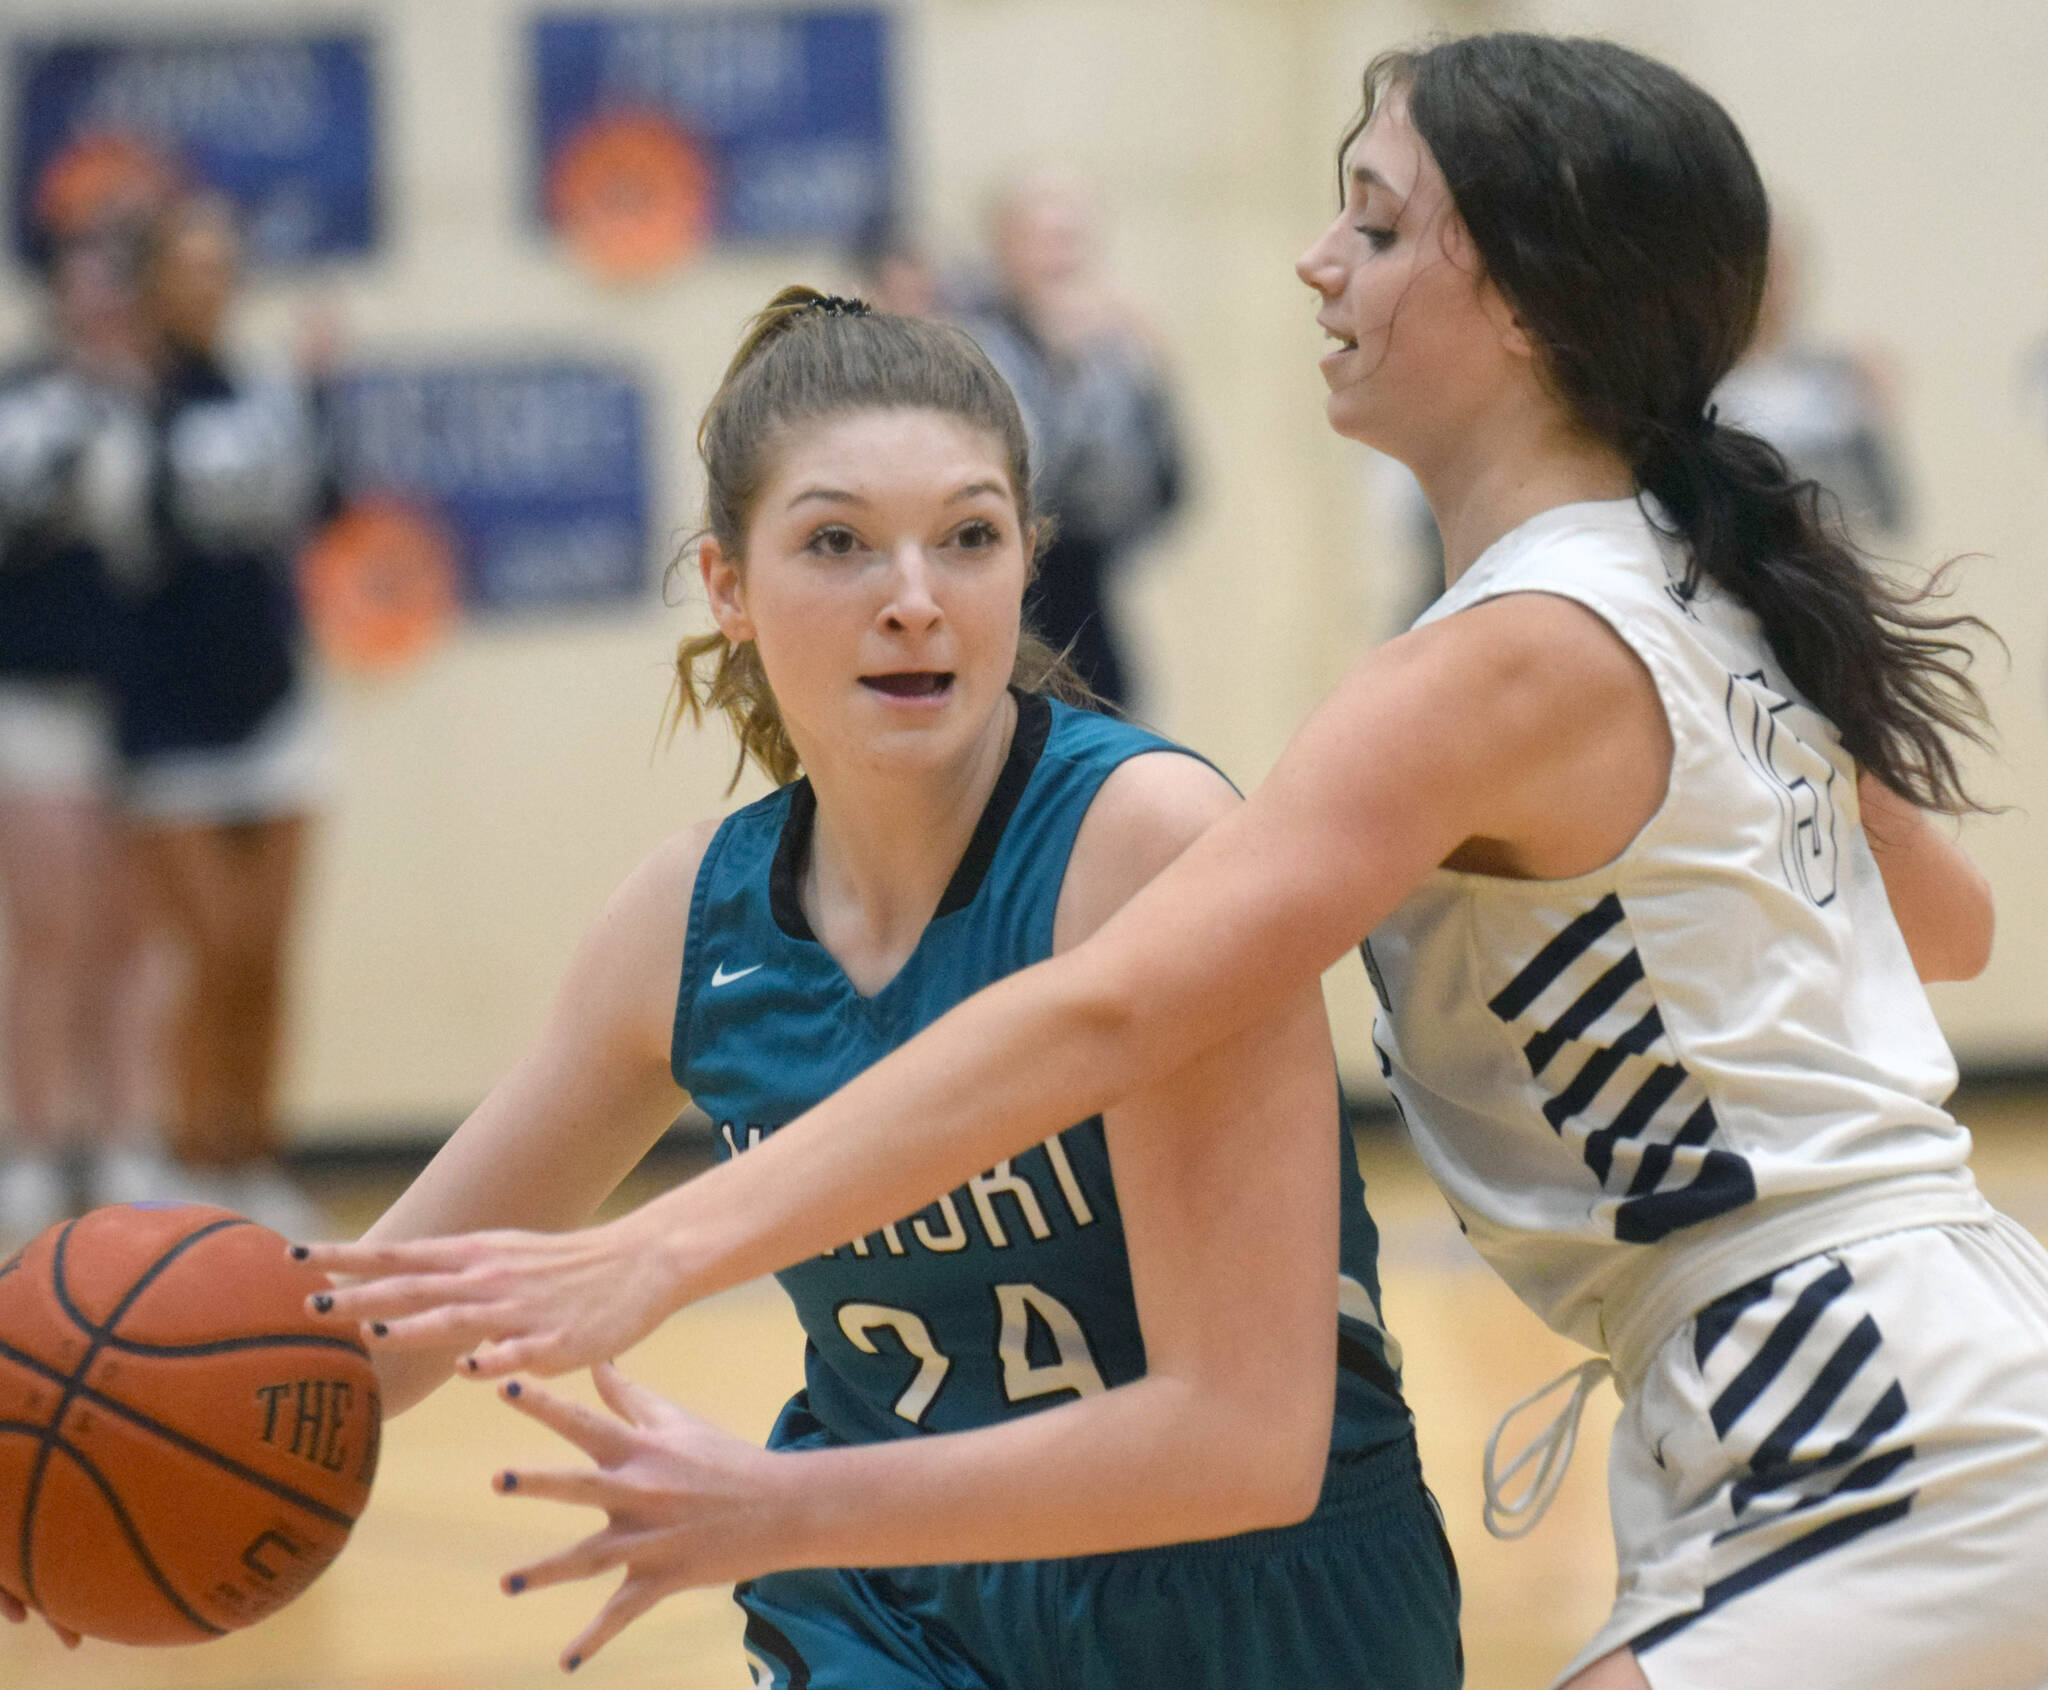 Nikiski’s Ashlynne Playle keeps the ball from Soldotna’s Adarra Hagelund on Tuesday, Feb. 8, 2022, at Soldotna High School in Soldotna, Alaska. (Photo by Camille Botello/Peninsula Clarion)